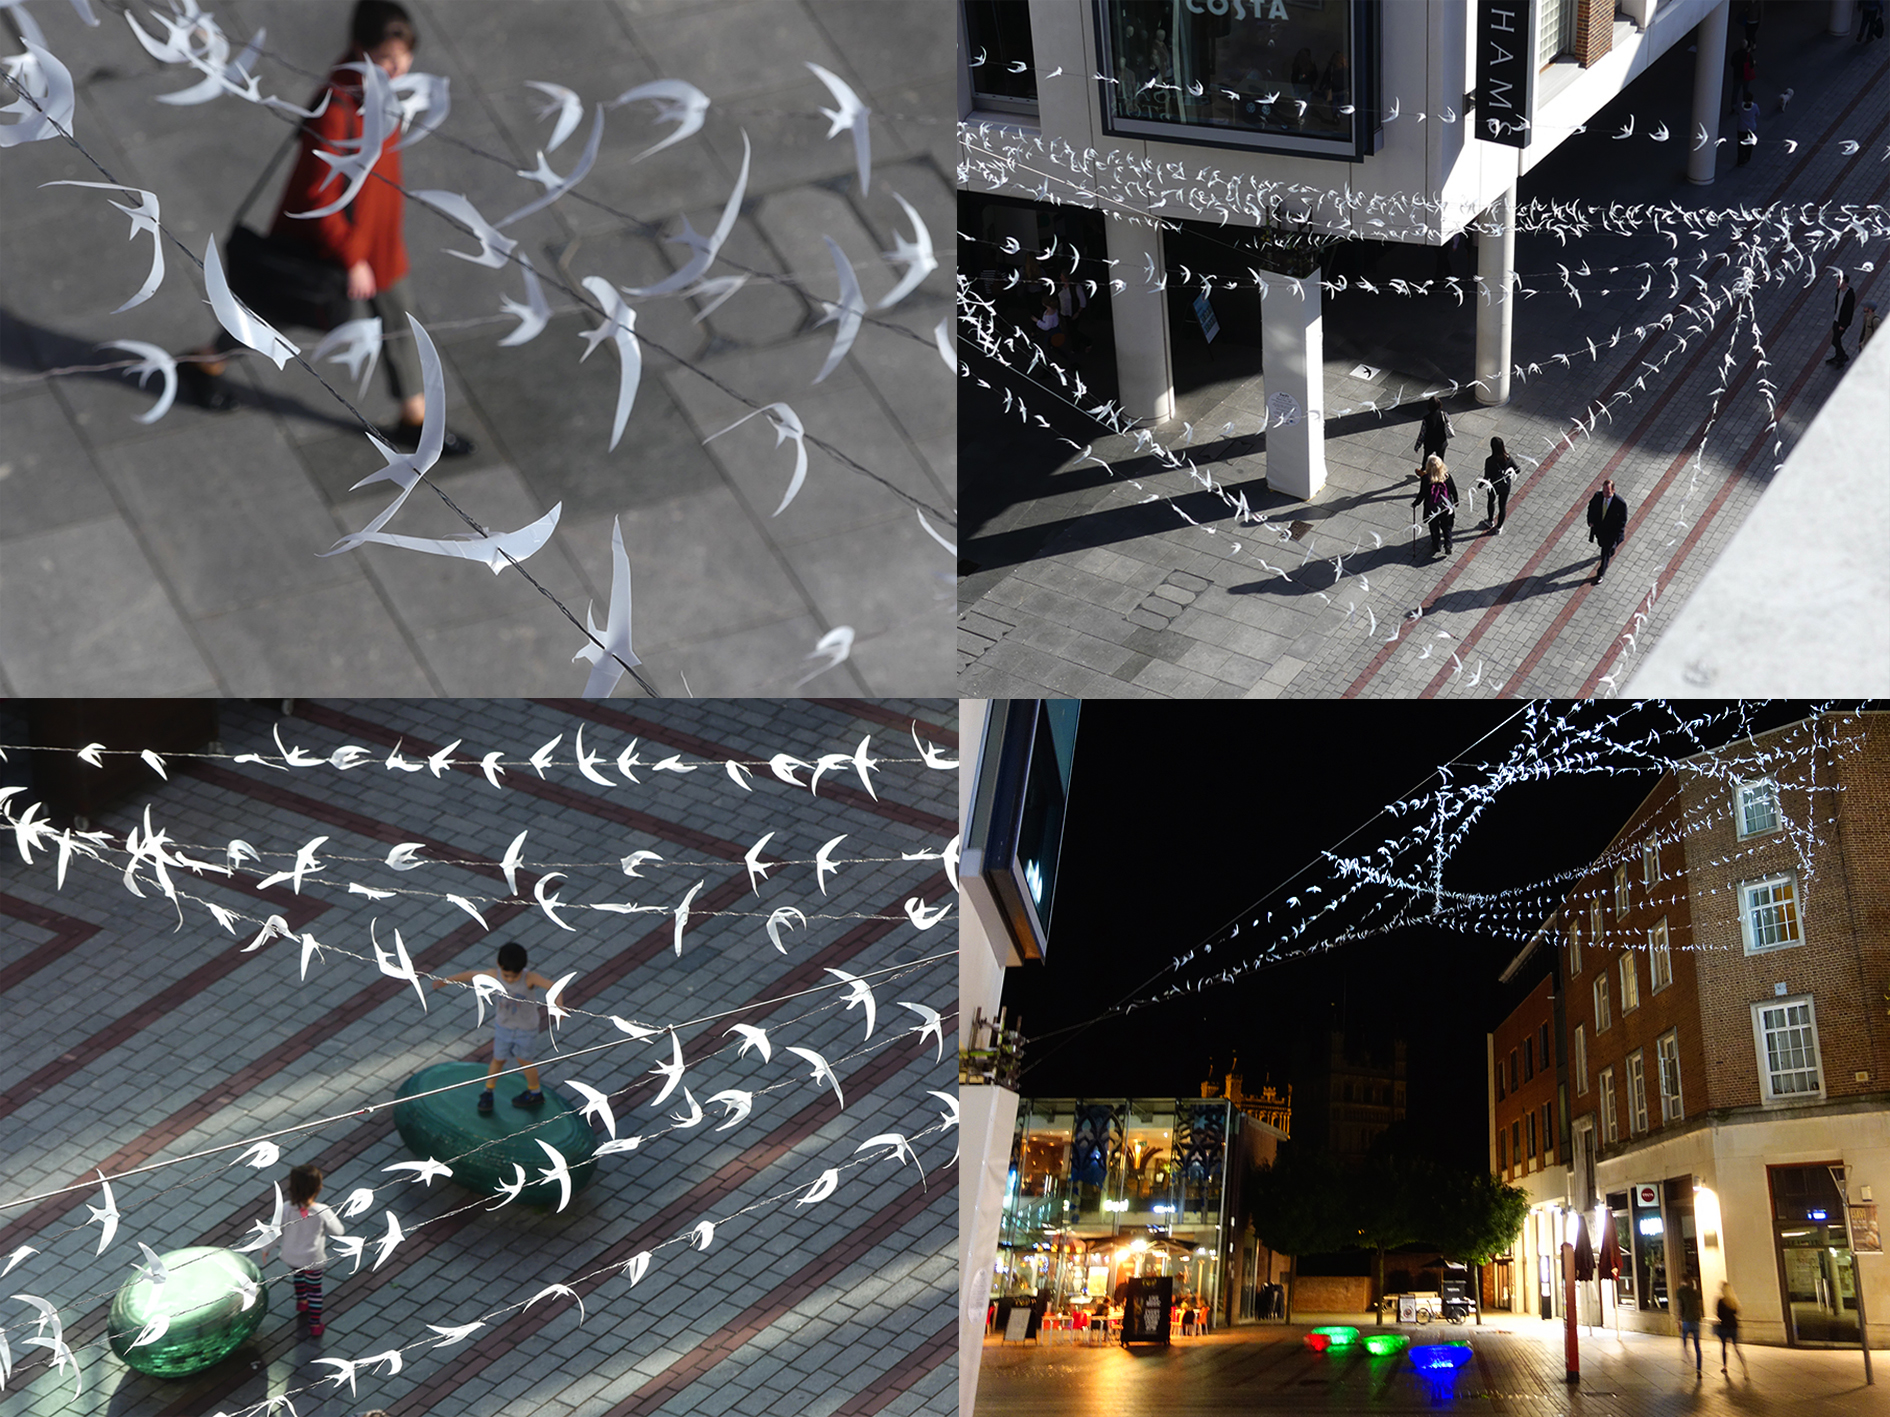 four images showing an installation of hand-made swifts above predestrian streets, by Naomi Hart